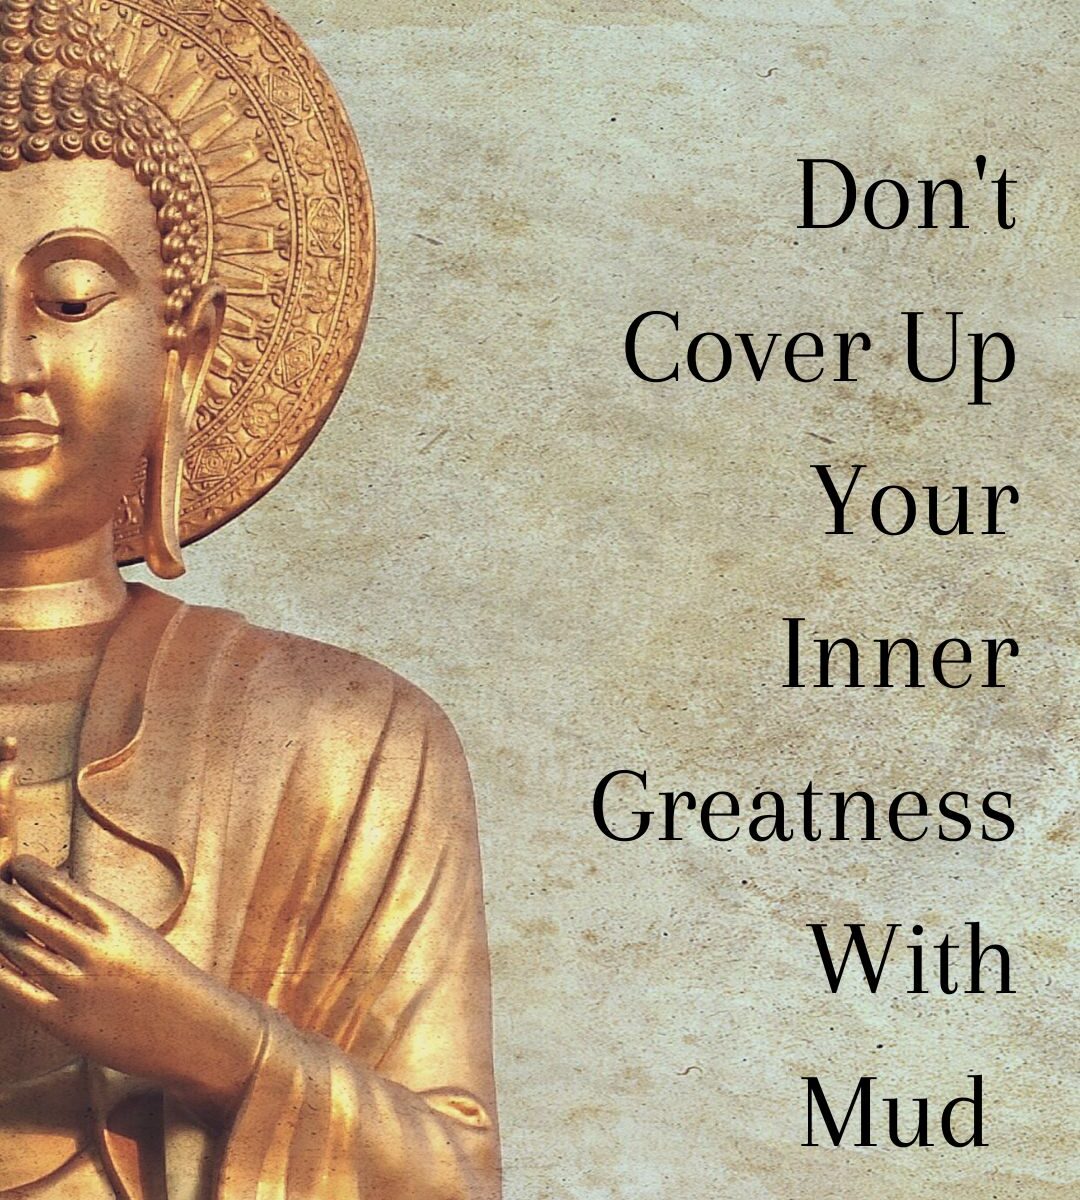 Let Your Inner Greatness shine through